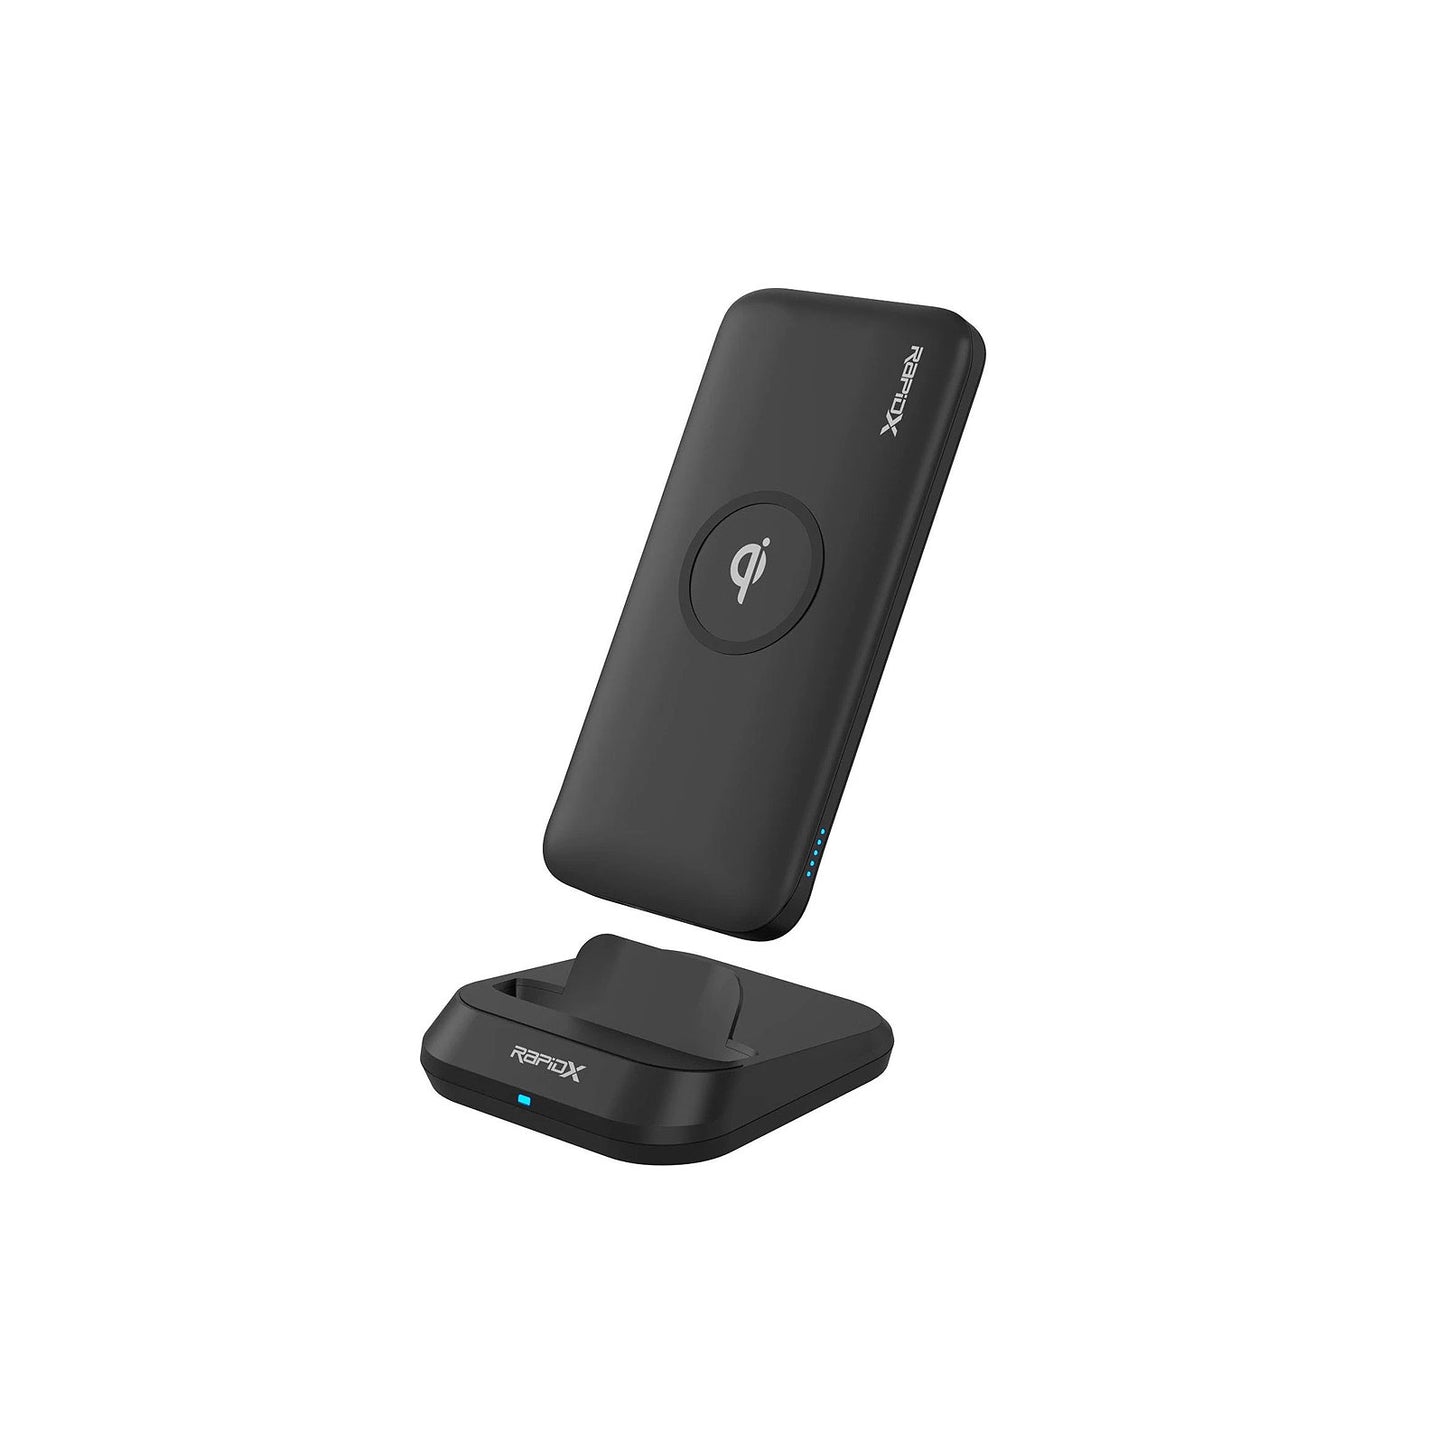 RapidX MyPort Power Bank and Wireless Charger, Black